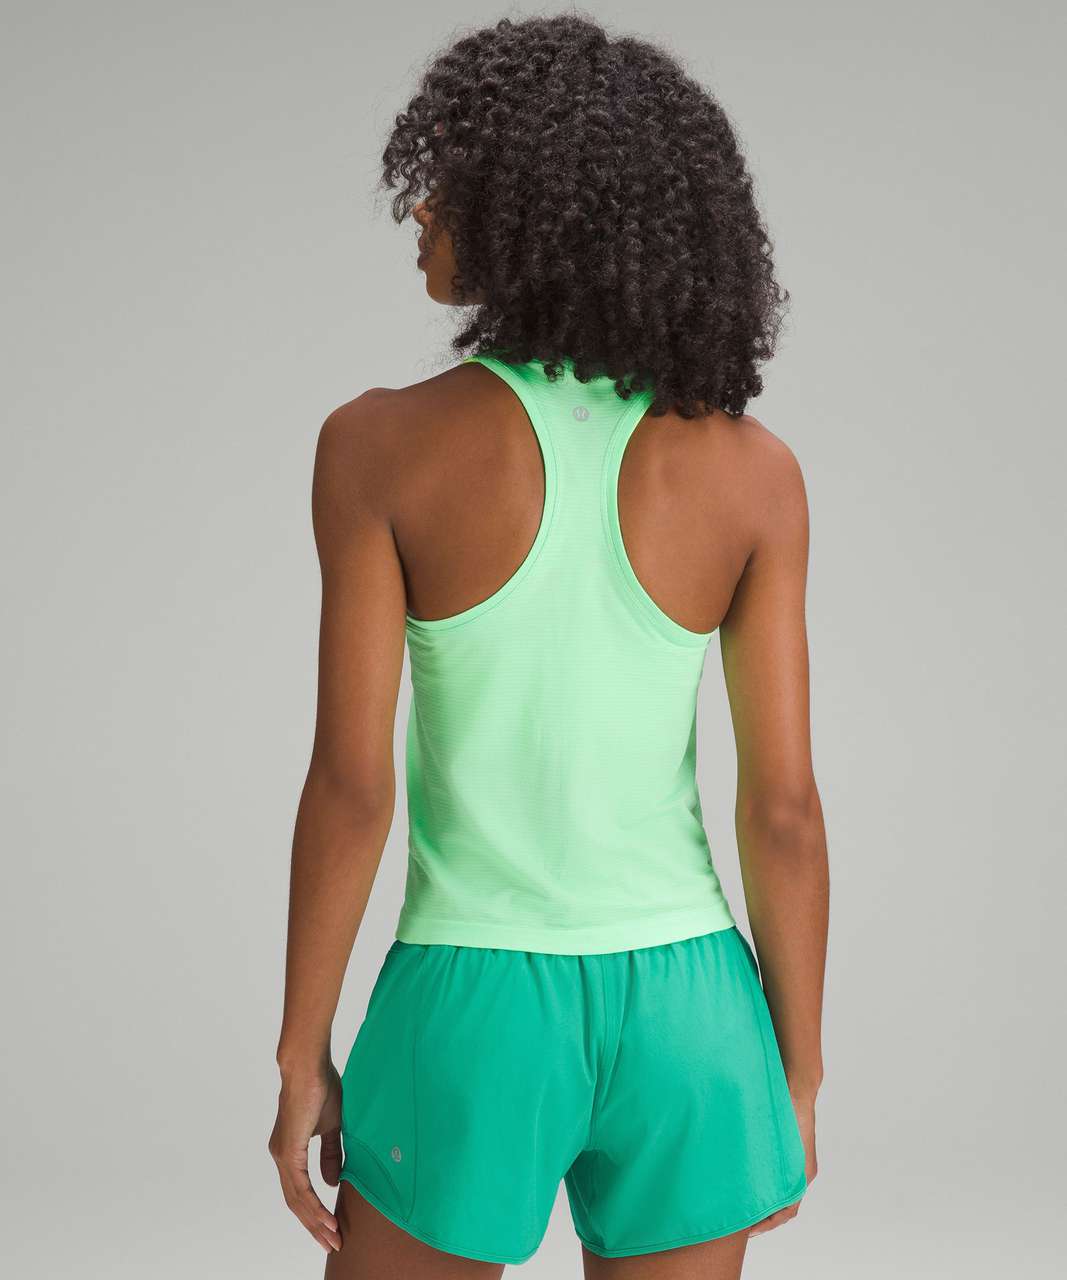 Champion ~Medium Mint Green loose fit Workout Racerback Built-In